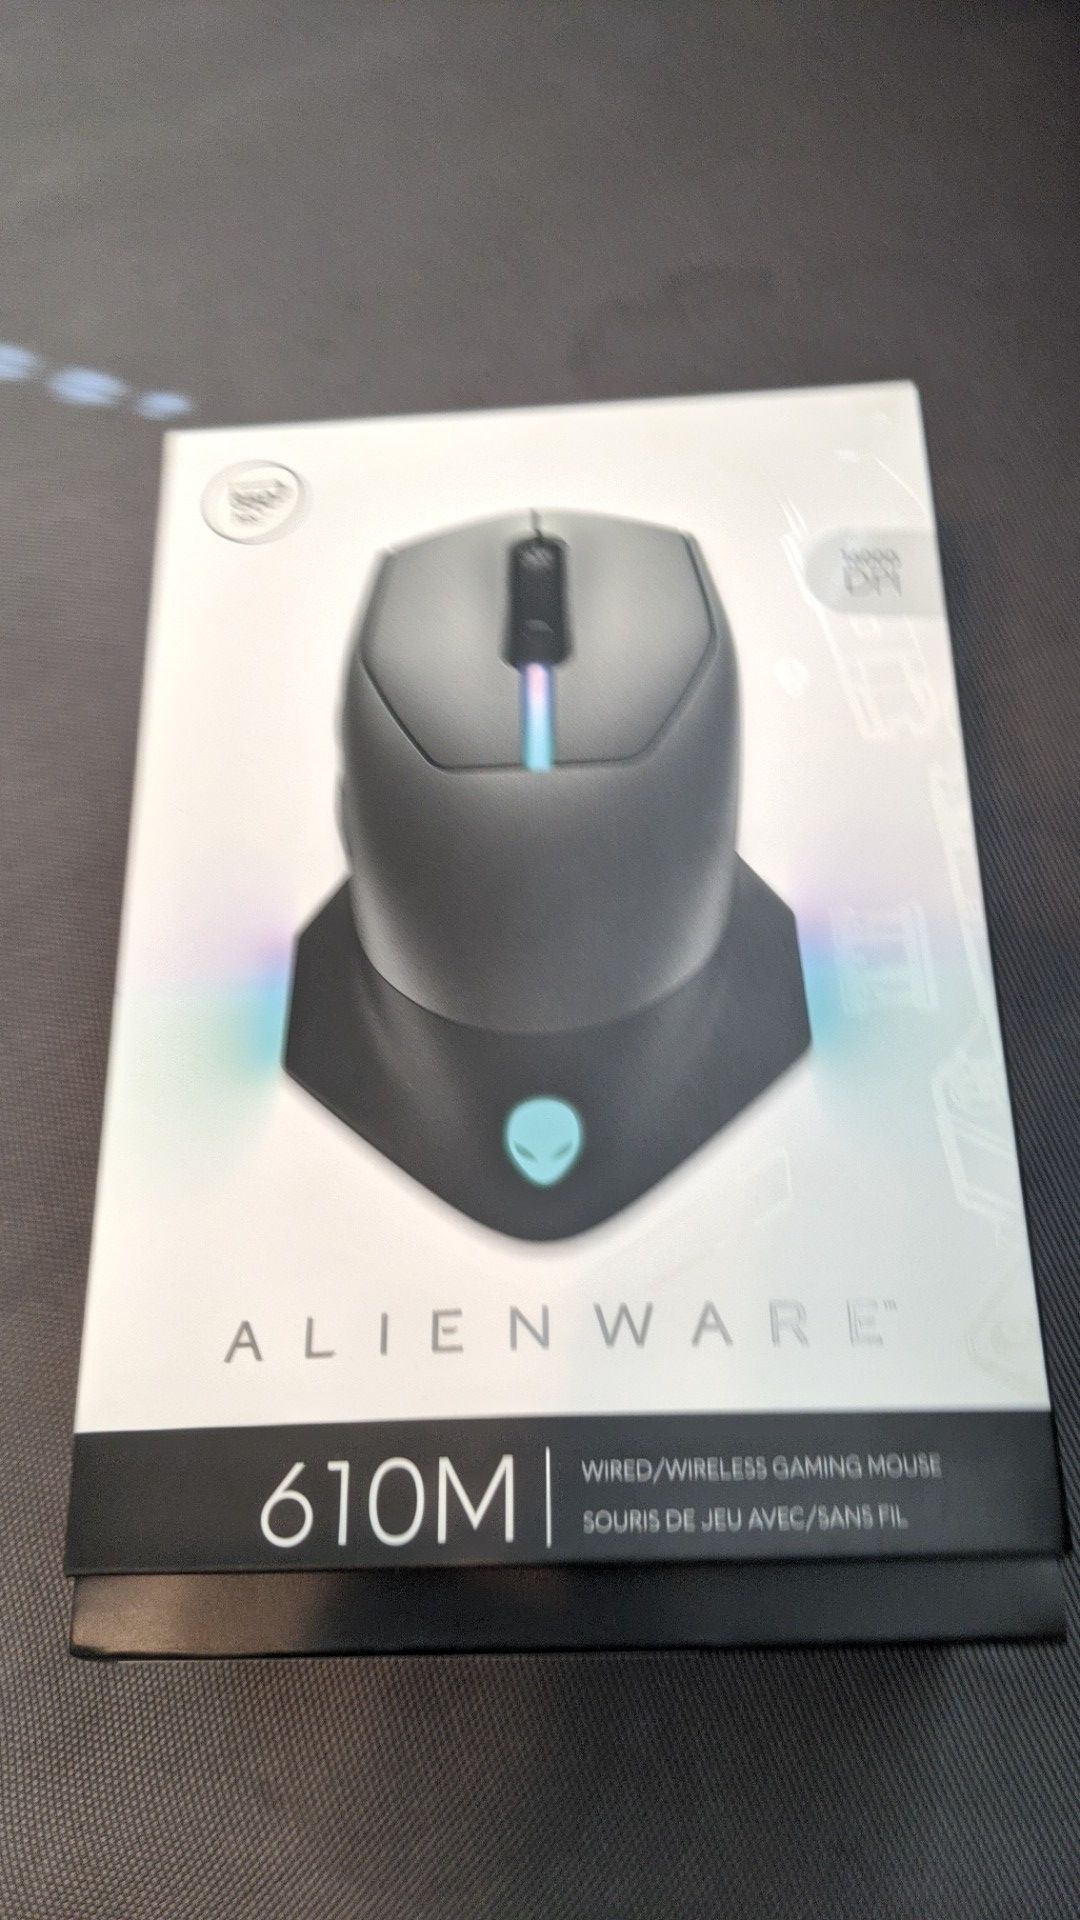 Alienware Wired / Wireless Gaming Mouse AW610M 16000 DPI